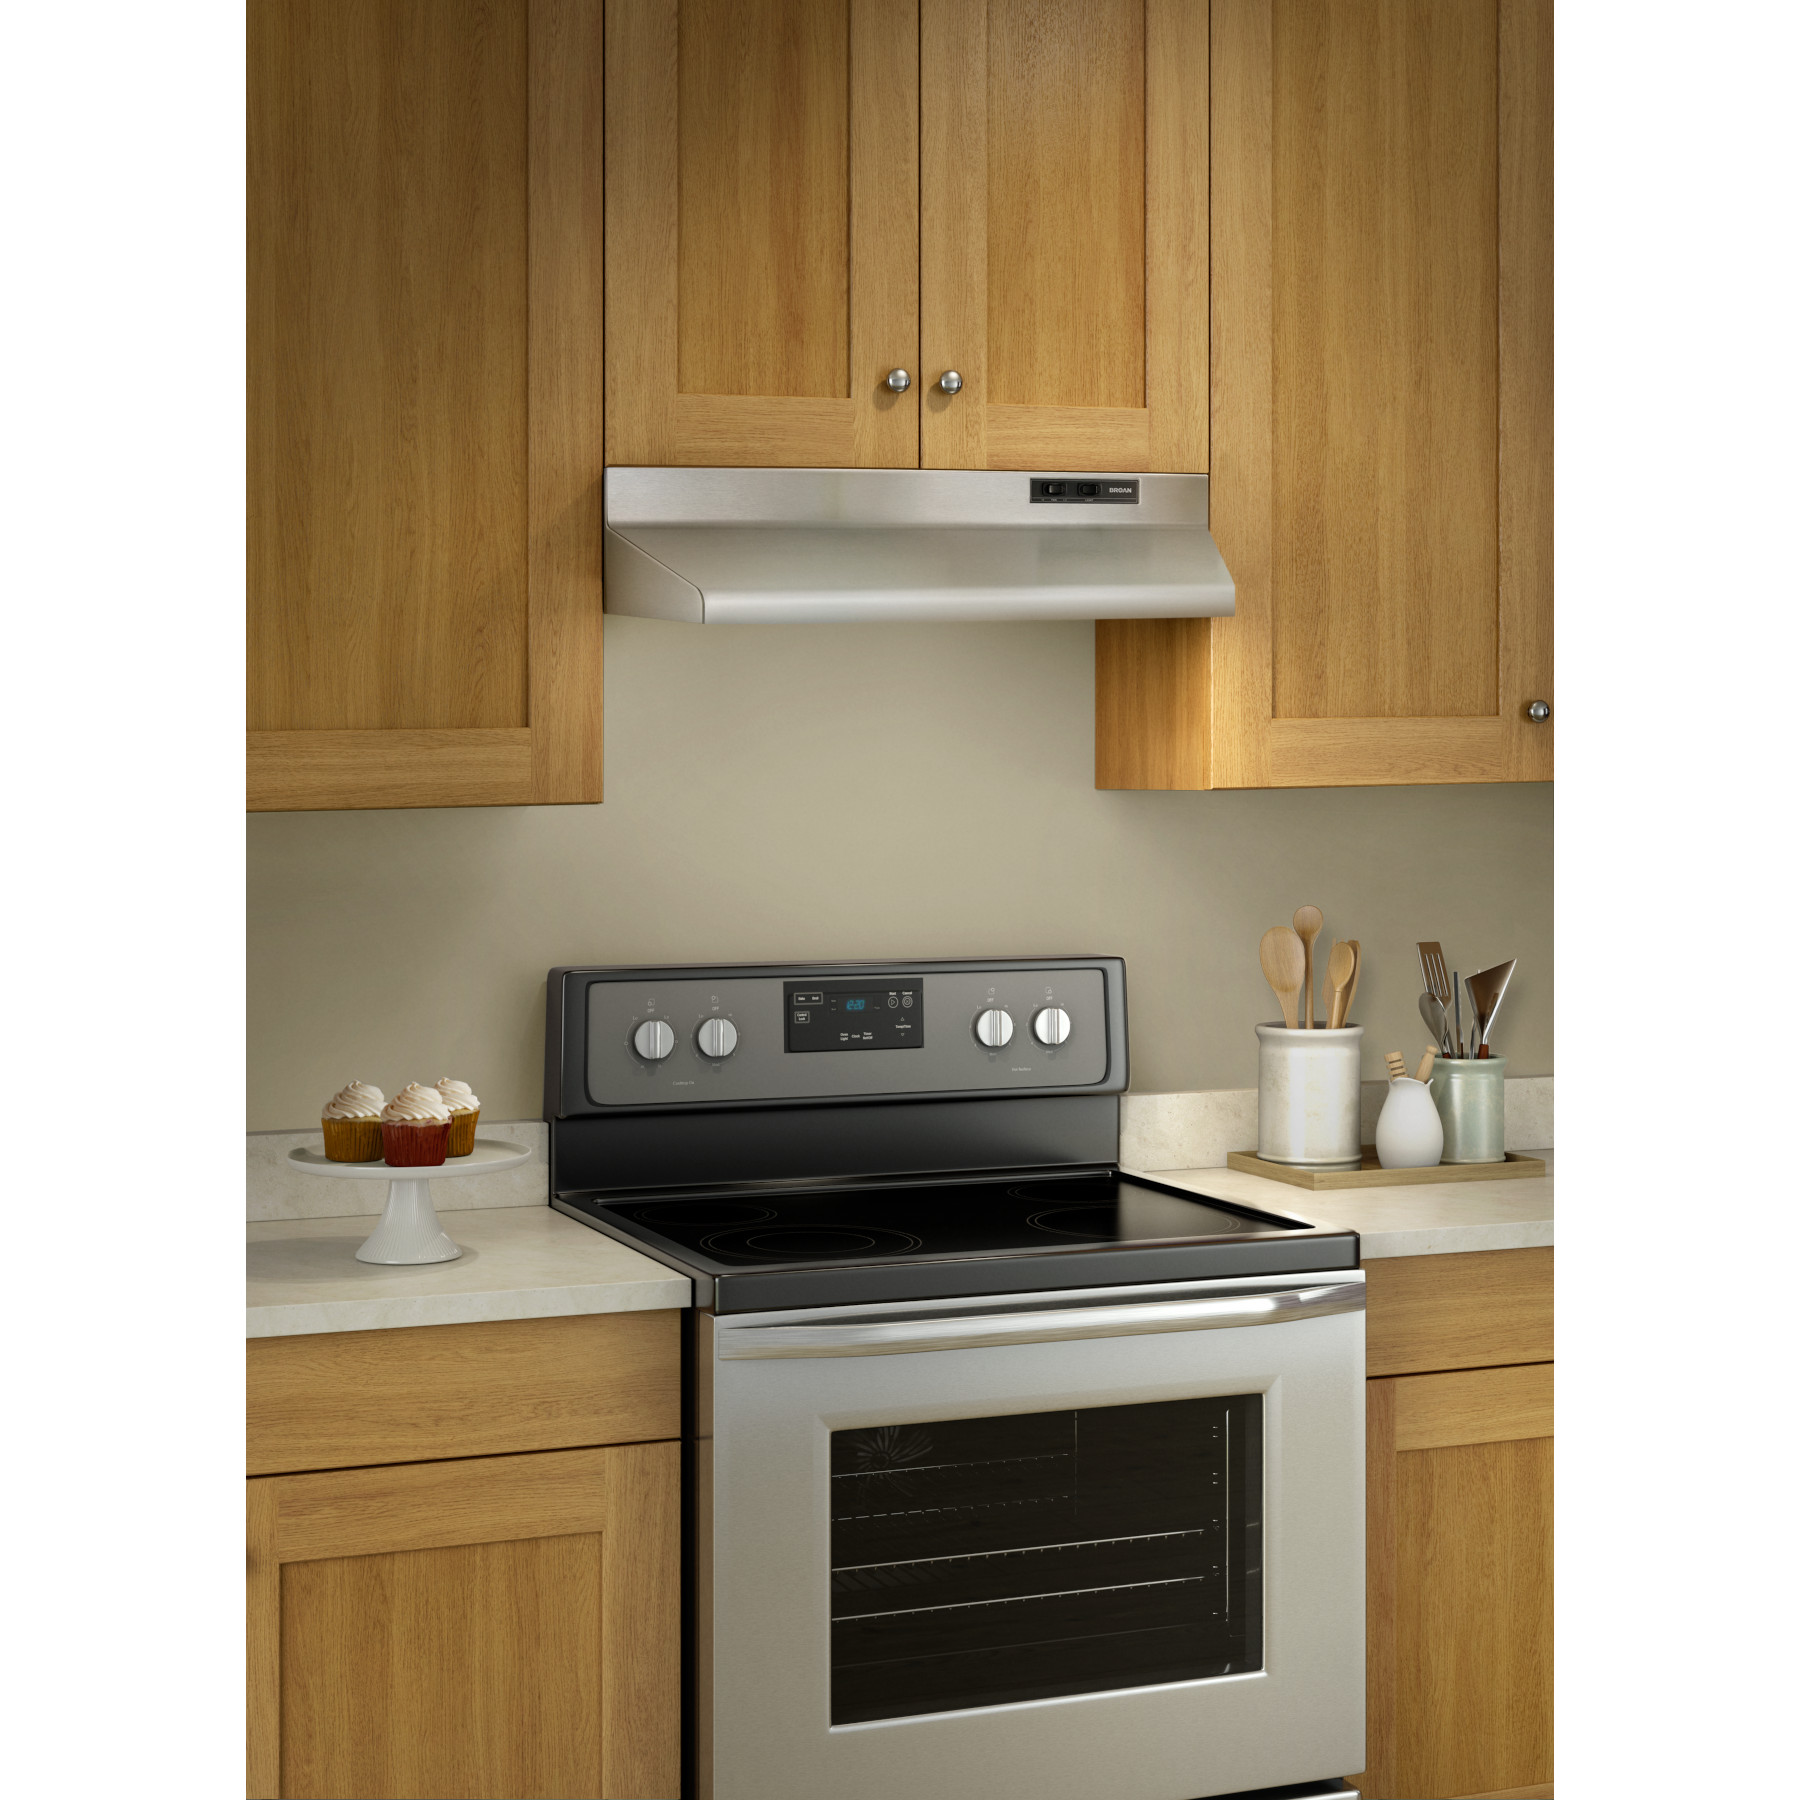 Broan 42000 Series 42 in Under Cabinet Range Hood with Light in Stainless Steel 